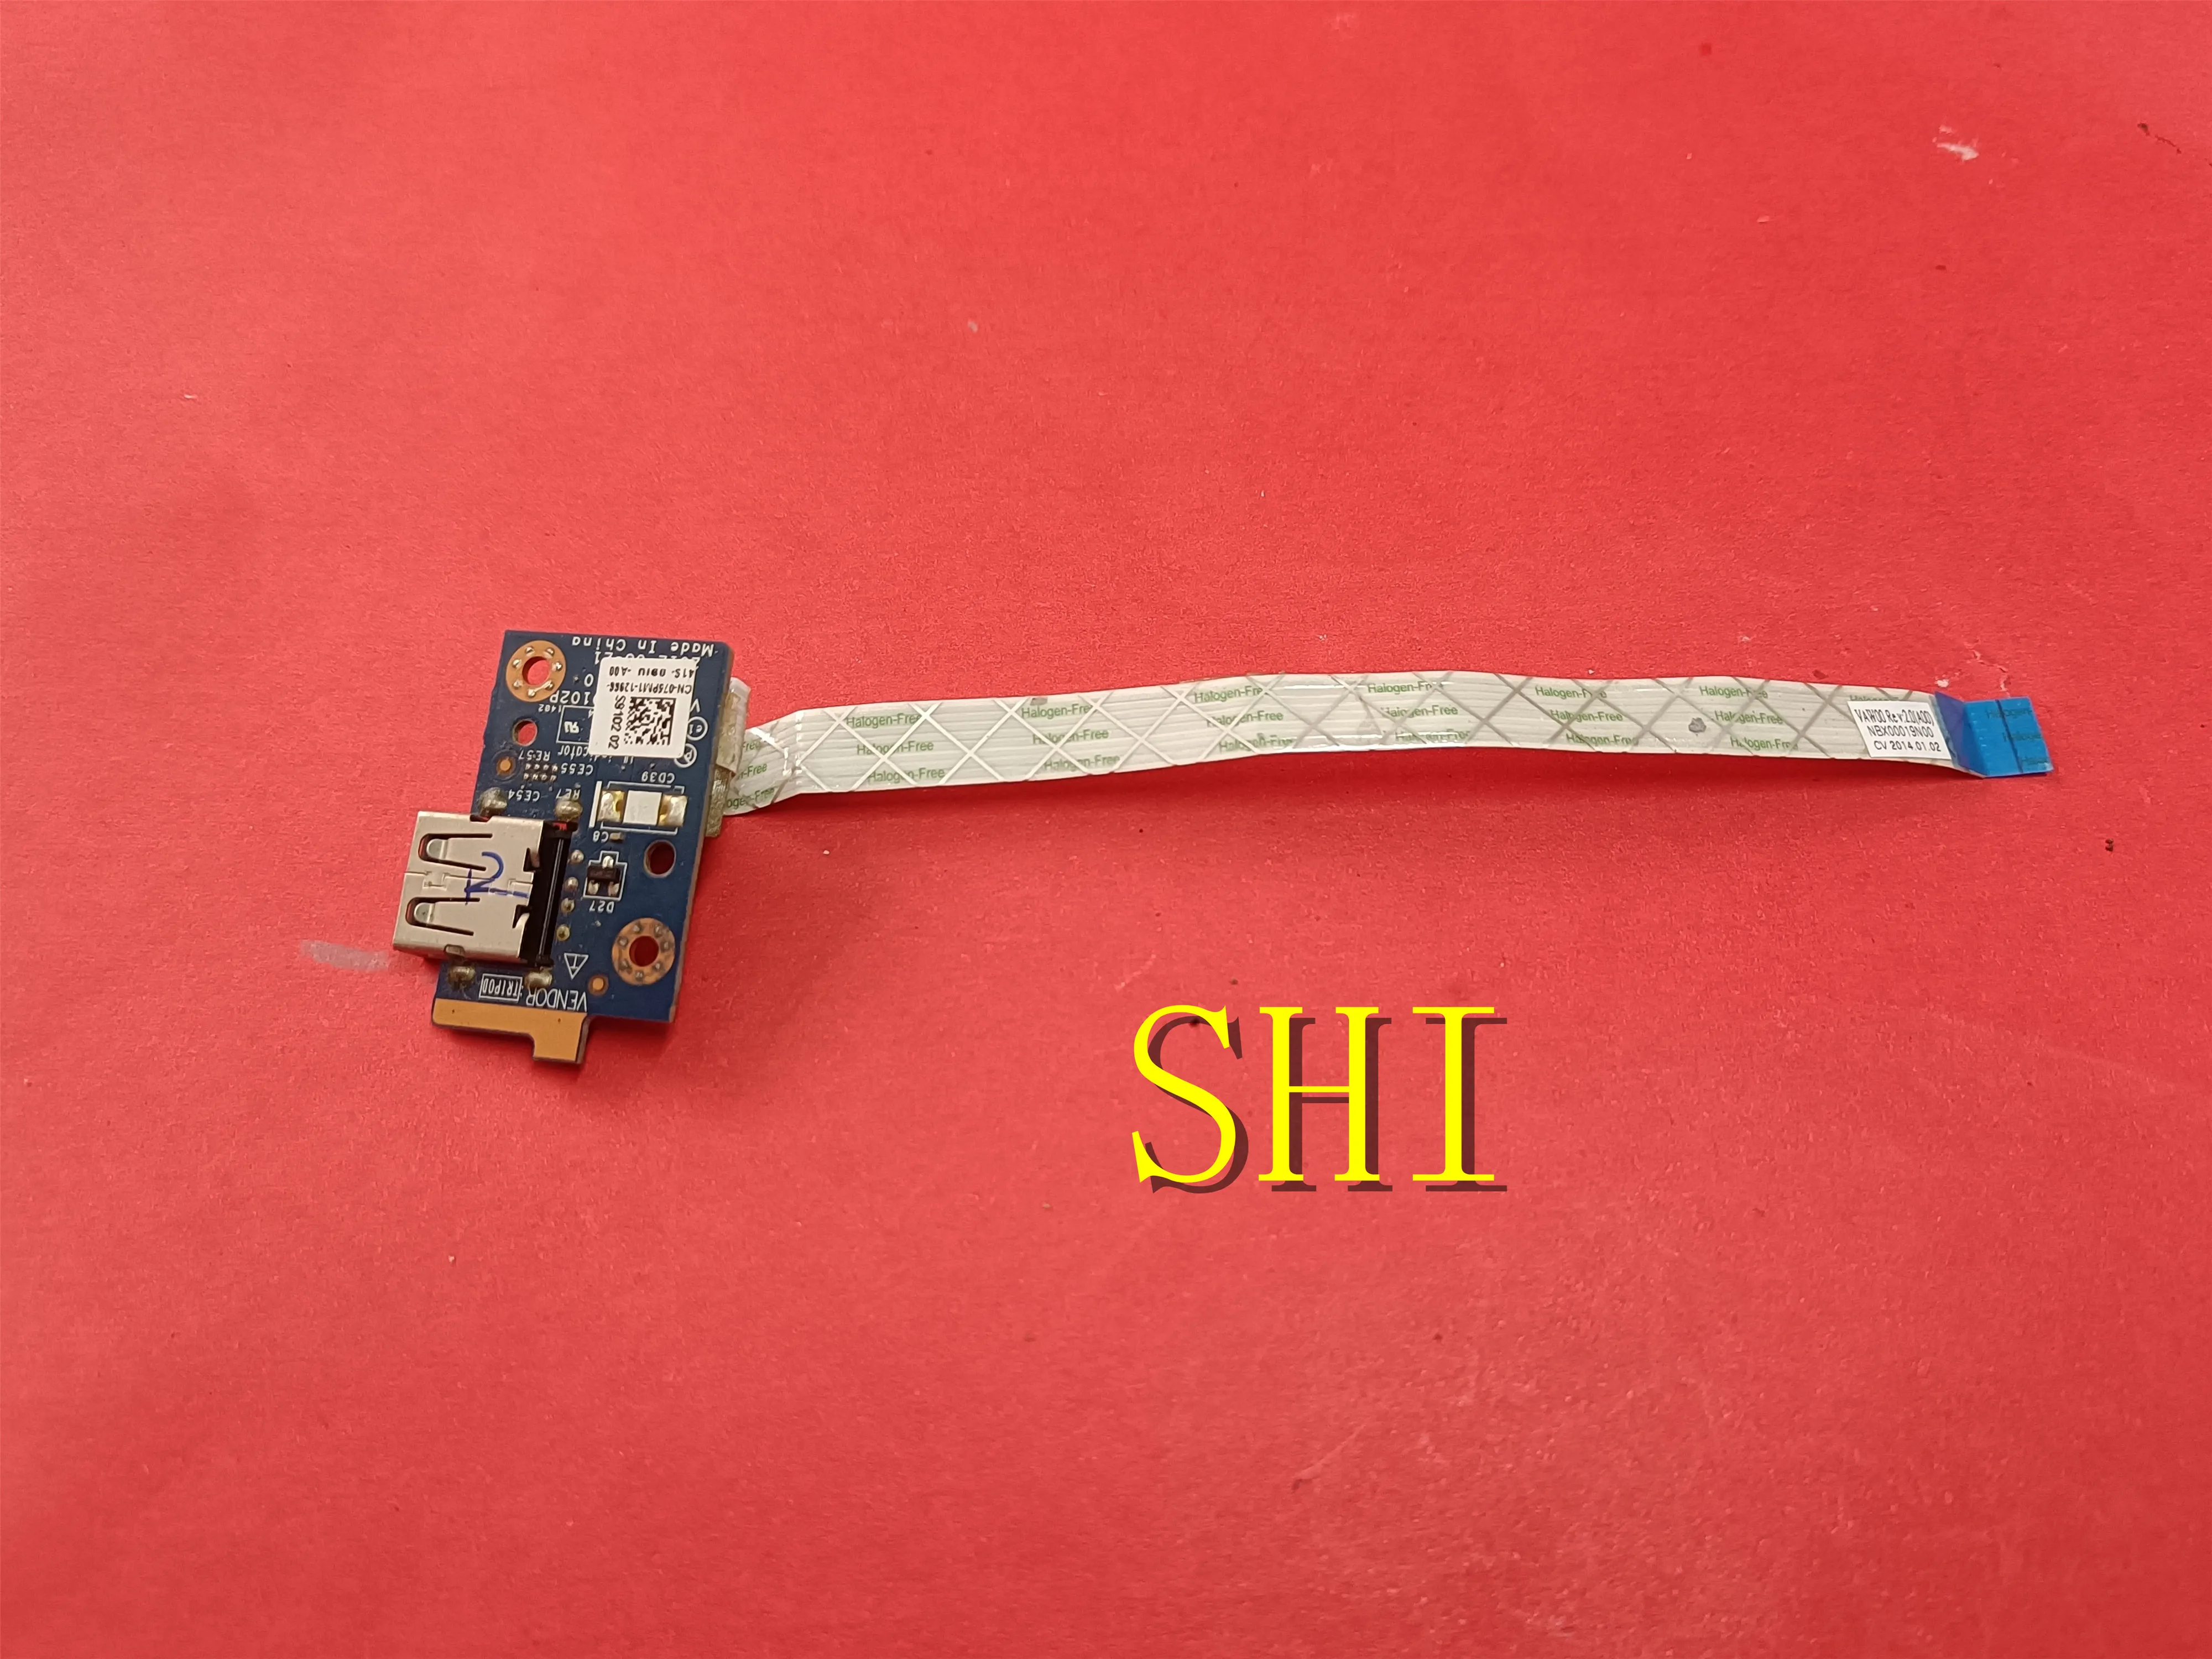 FOR Dell 15-3521 15 3521 3537 USB Port Board & Cable LS-9102P 075PM1 аккумуляторная батарея для ноутбука dell inspiron 15 3521 65wh mr90y oem 56705